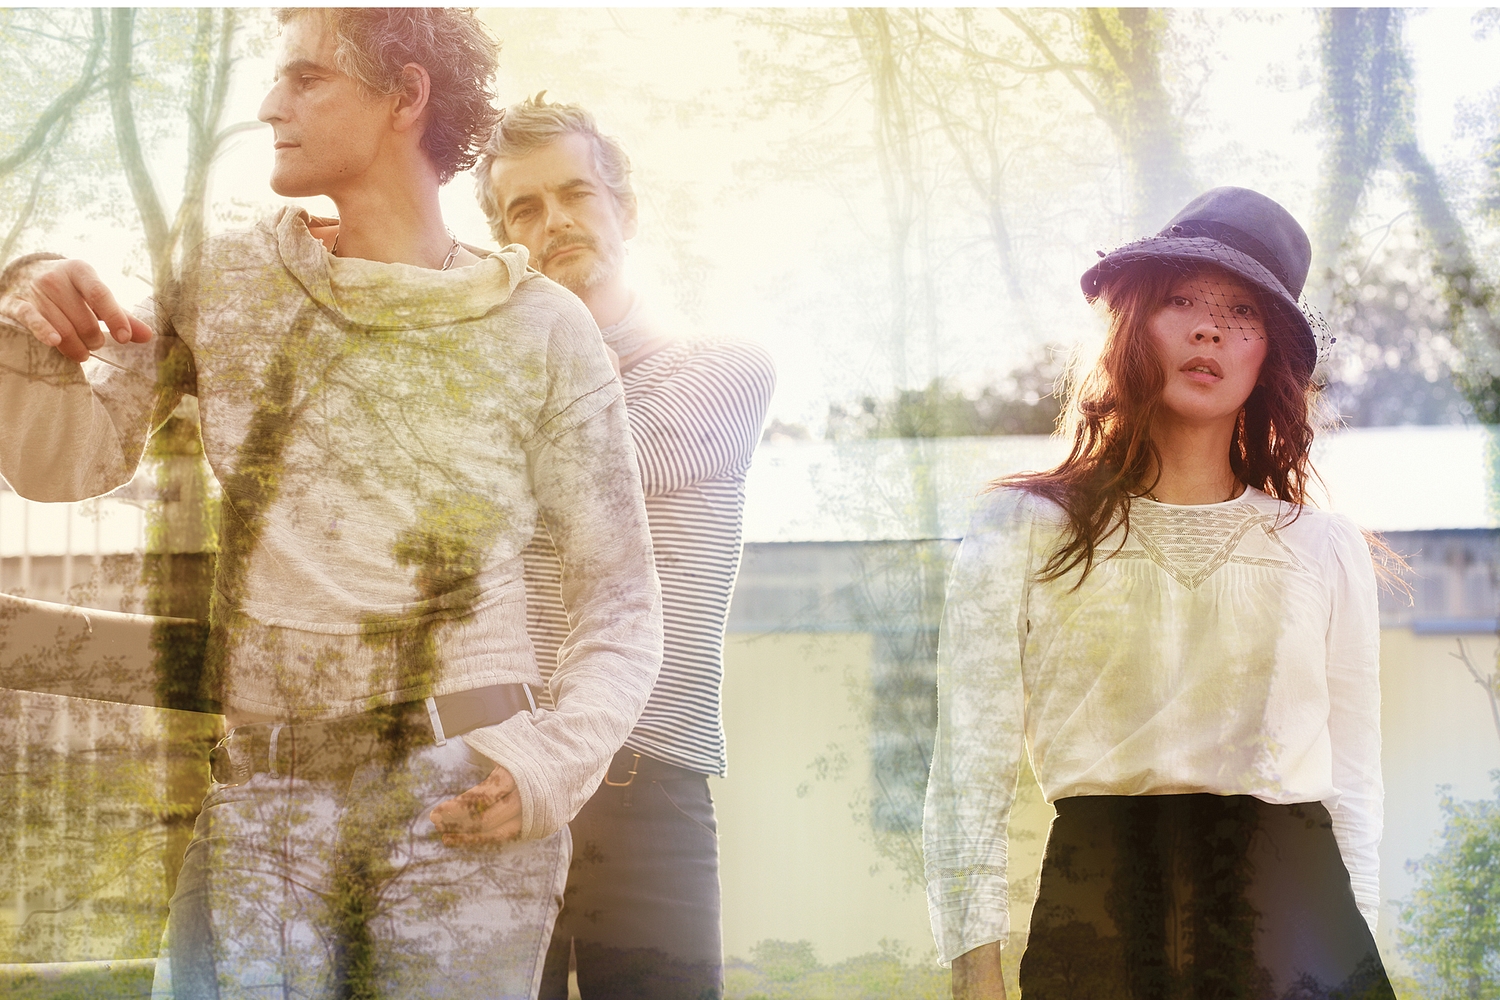 Blonde Redhead giveaway new track, ‘The One I Know’